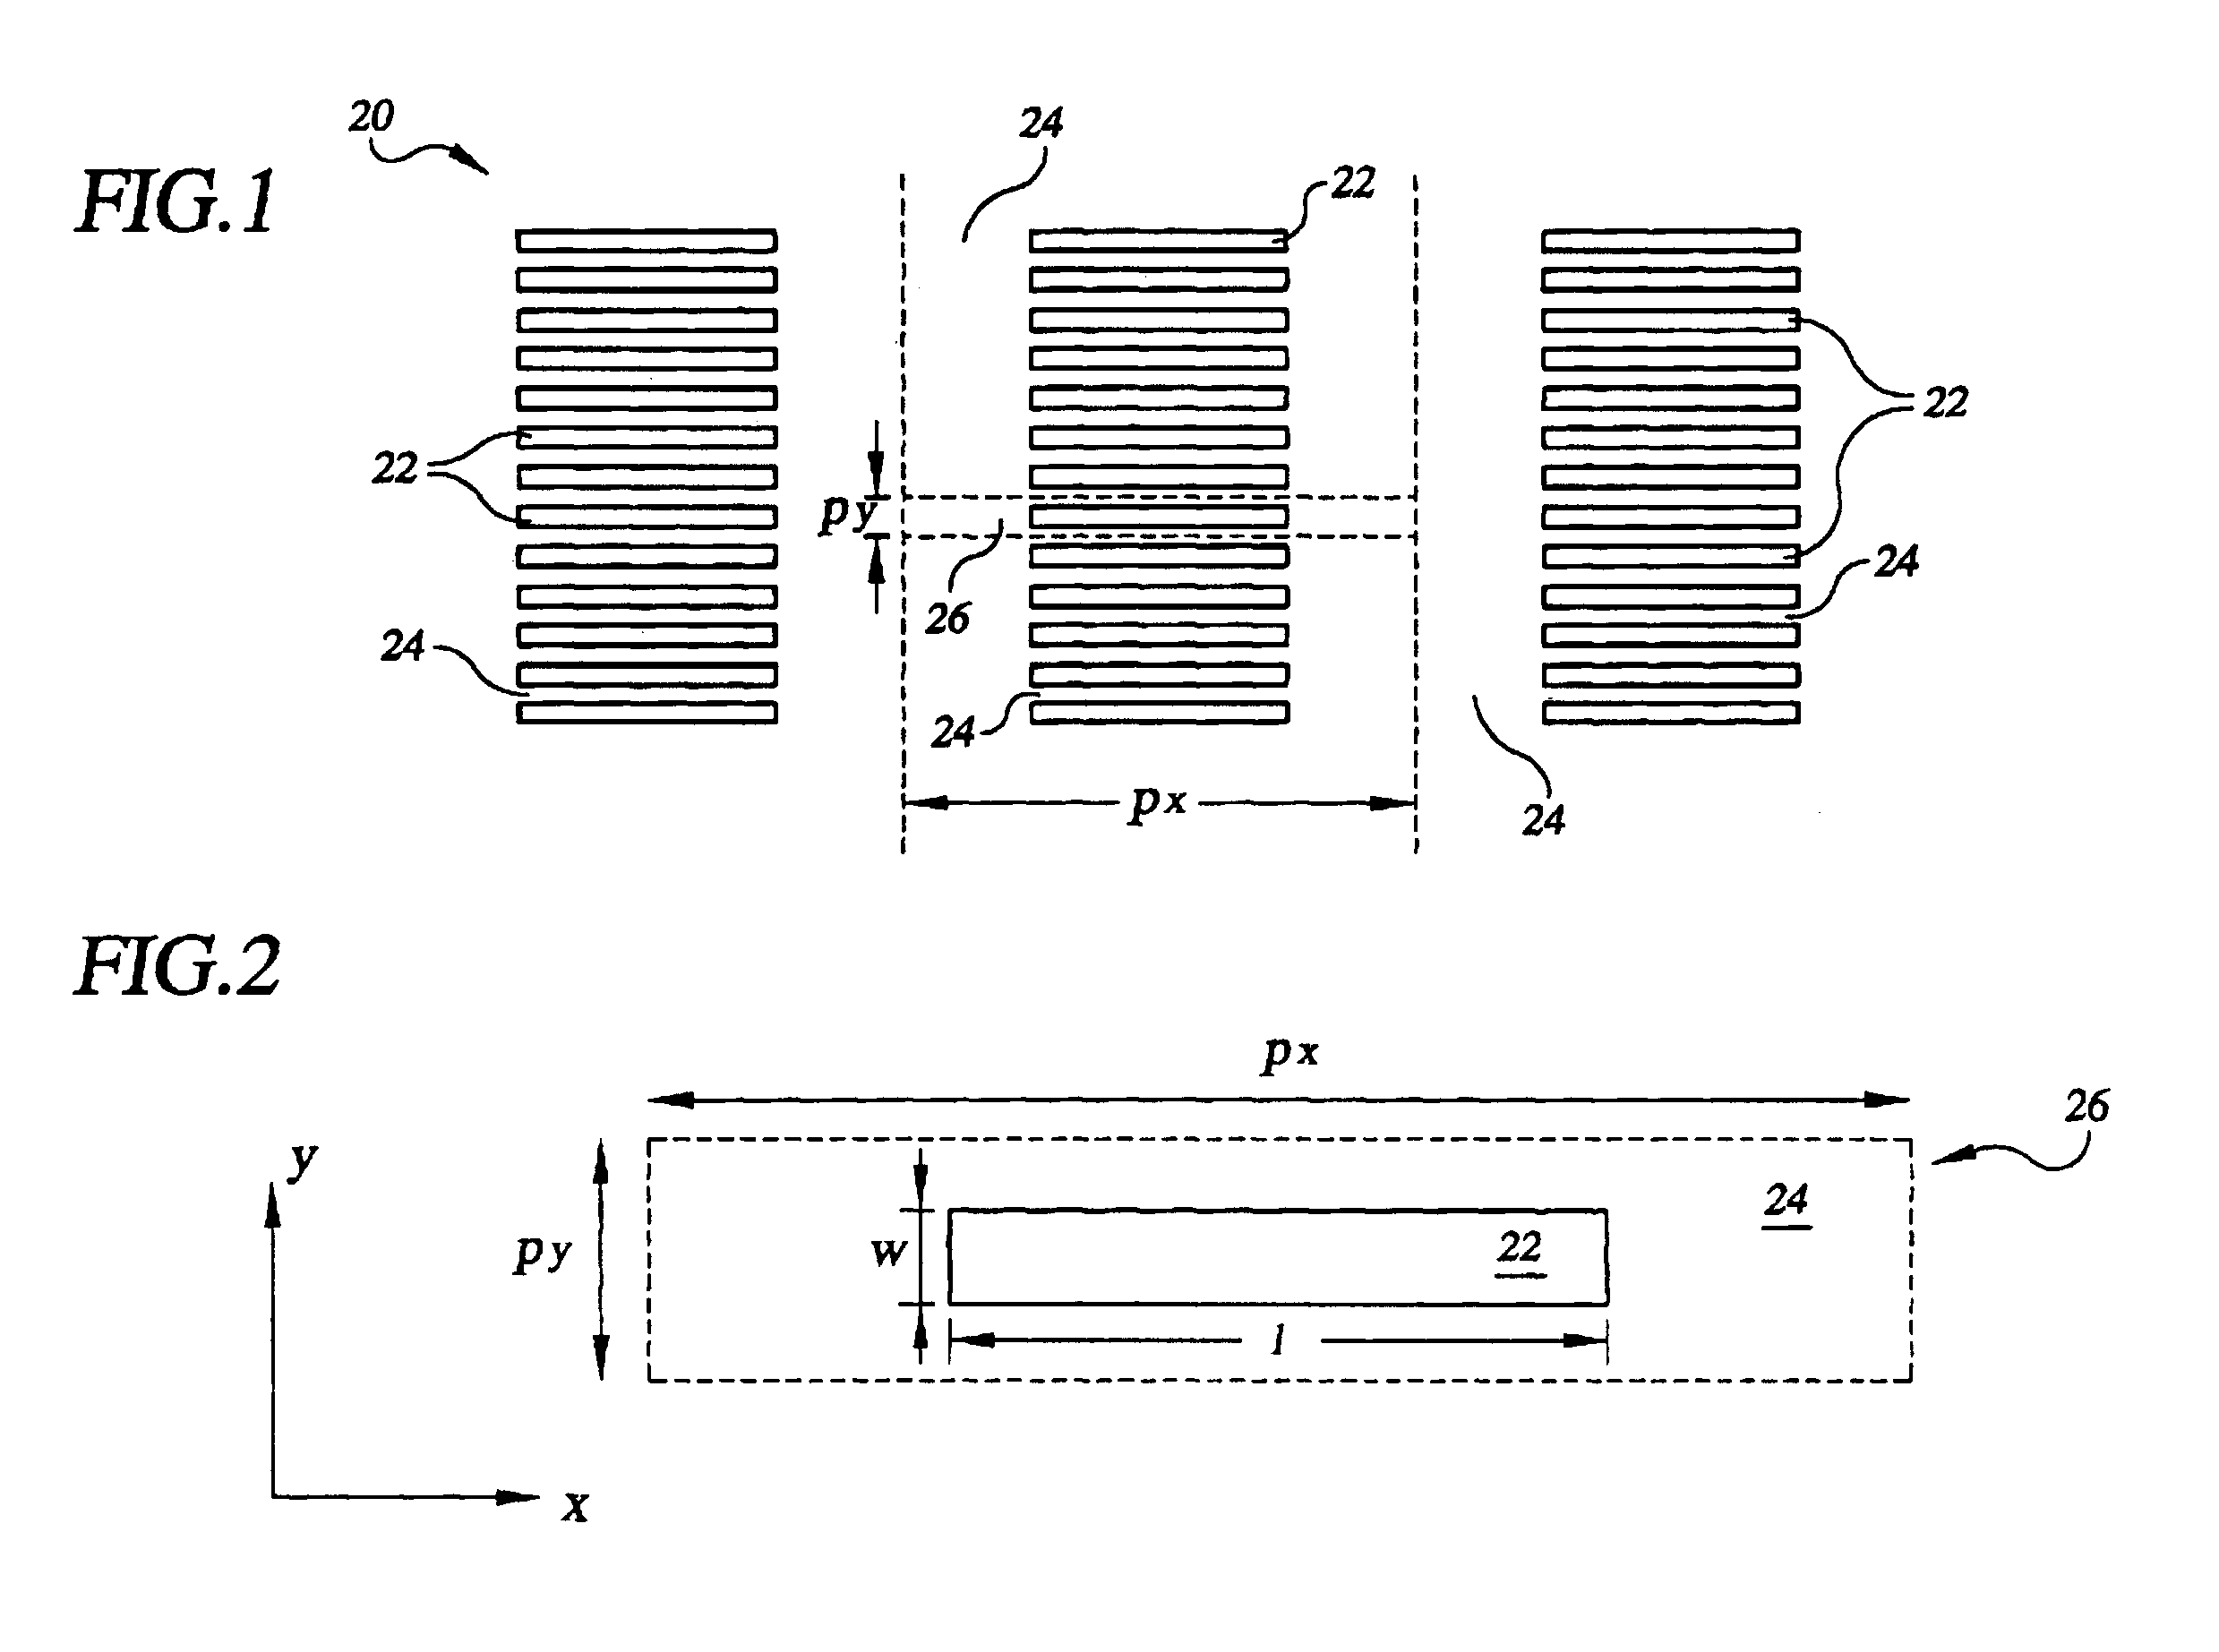 Integrated lithographic print and detection model for optical CD